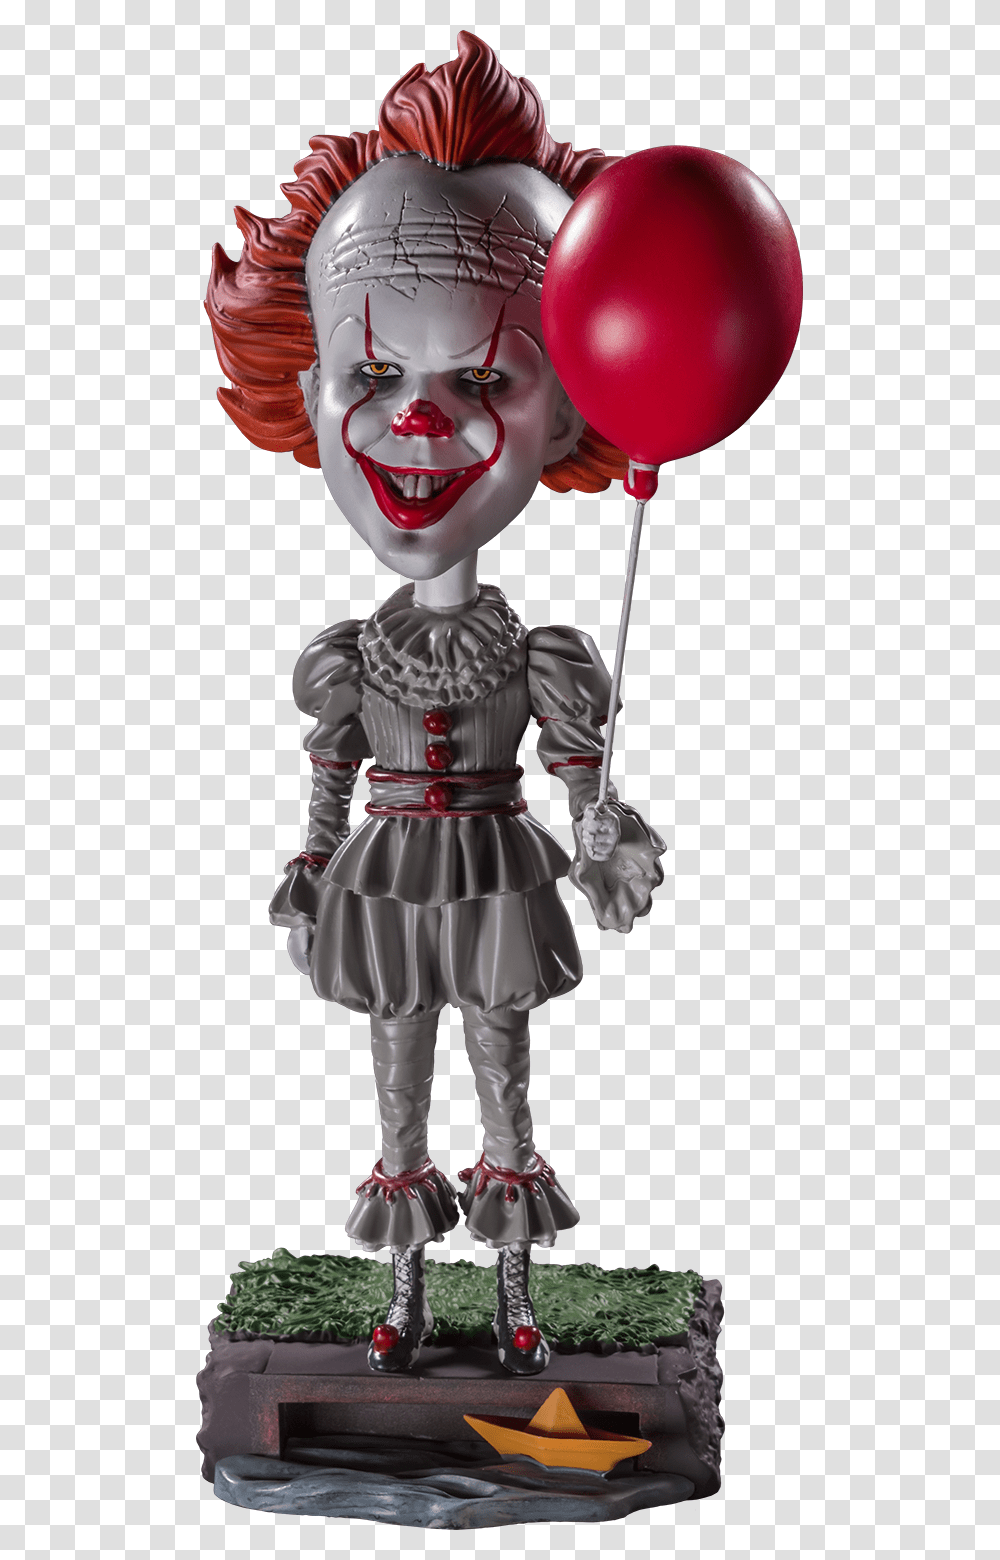 Pennywise Bobblehead Neca Pennywise Head Knocker, Robot, Doll, Toy, Figurine Transparent Png